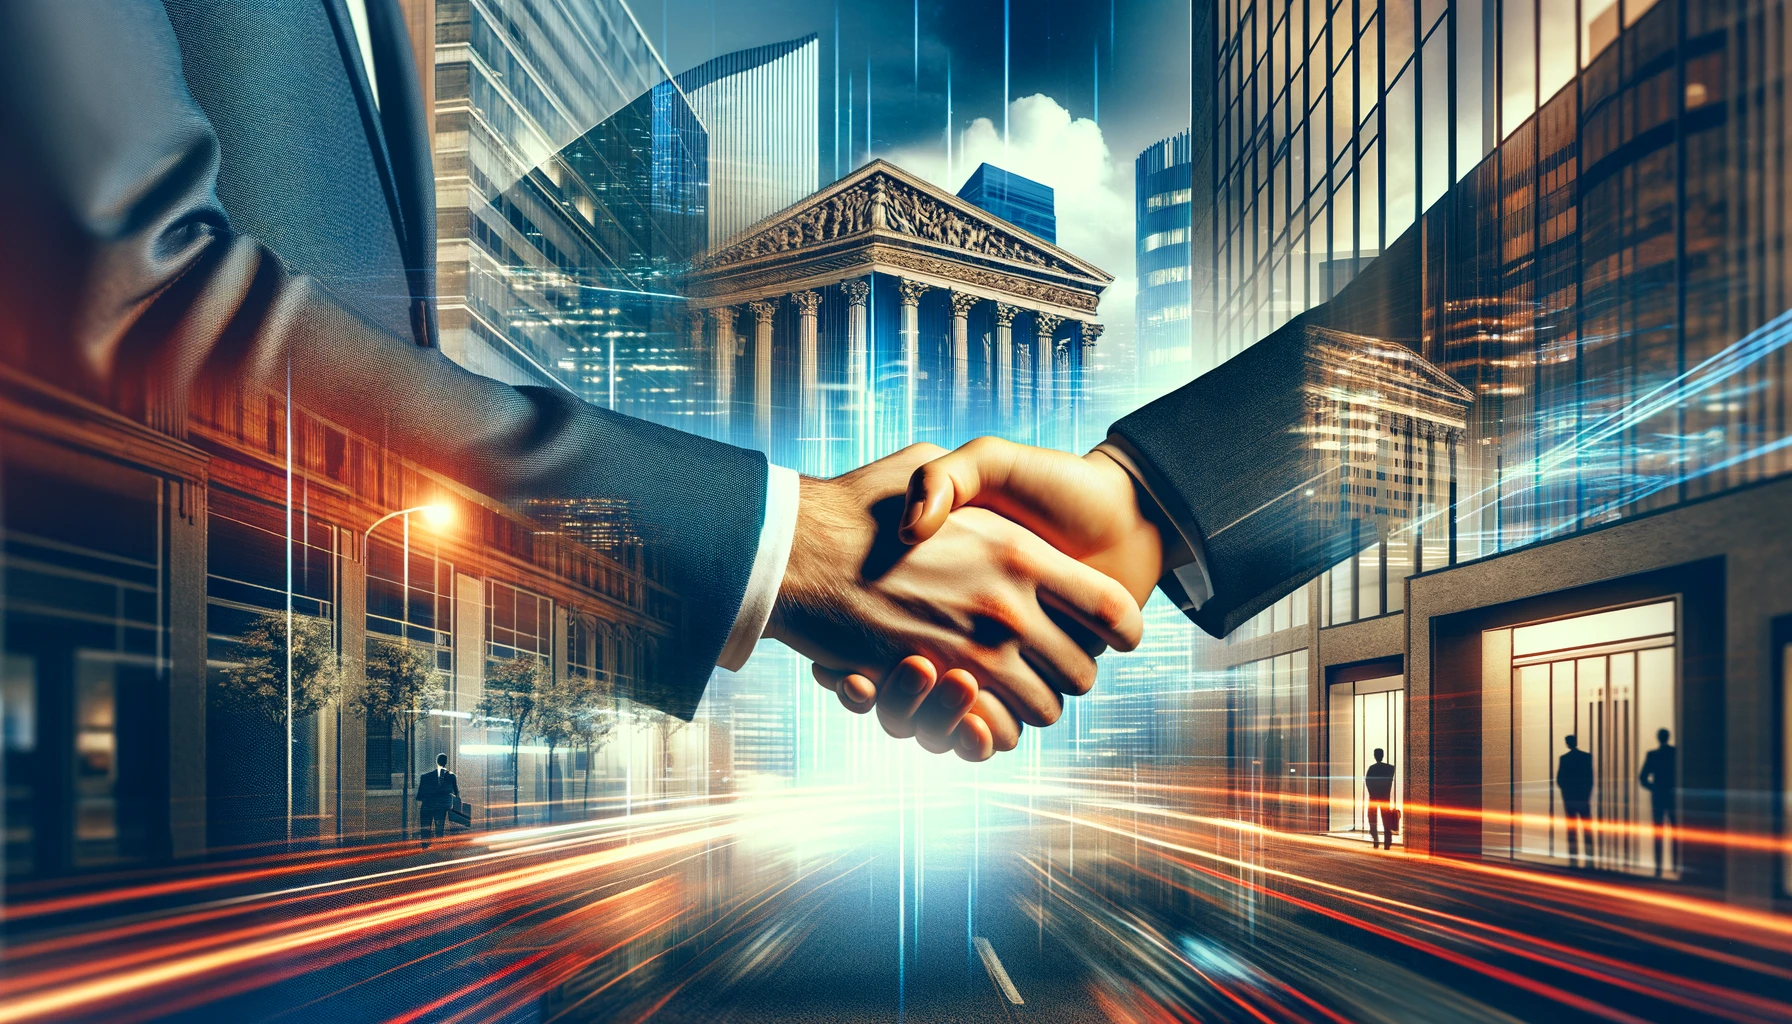 A dynamic scene of a handshake between a business owner and a loan officer in front of a bank or financial institution. The background showcases a bustling cityscape, symbolizing economic activity and growth. This handshake signifies the agreement and trust in the partnership for a working capital loan. The image represents the critical step of securing financing to fuel business operations and growth, highlighting the mutual benefits of such financial agreements for both lenders and borrowers in the vibrant ecosystem of commerce.